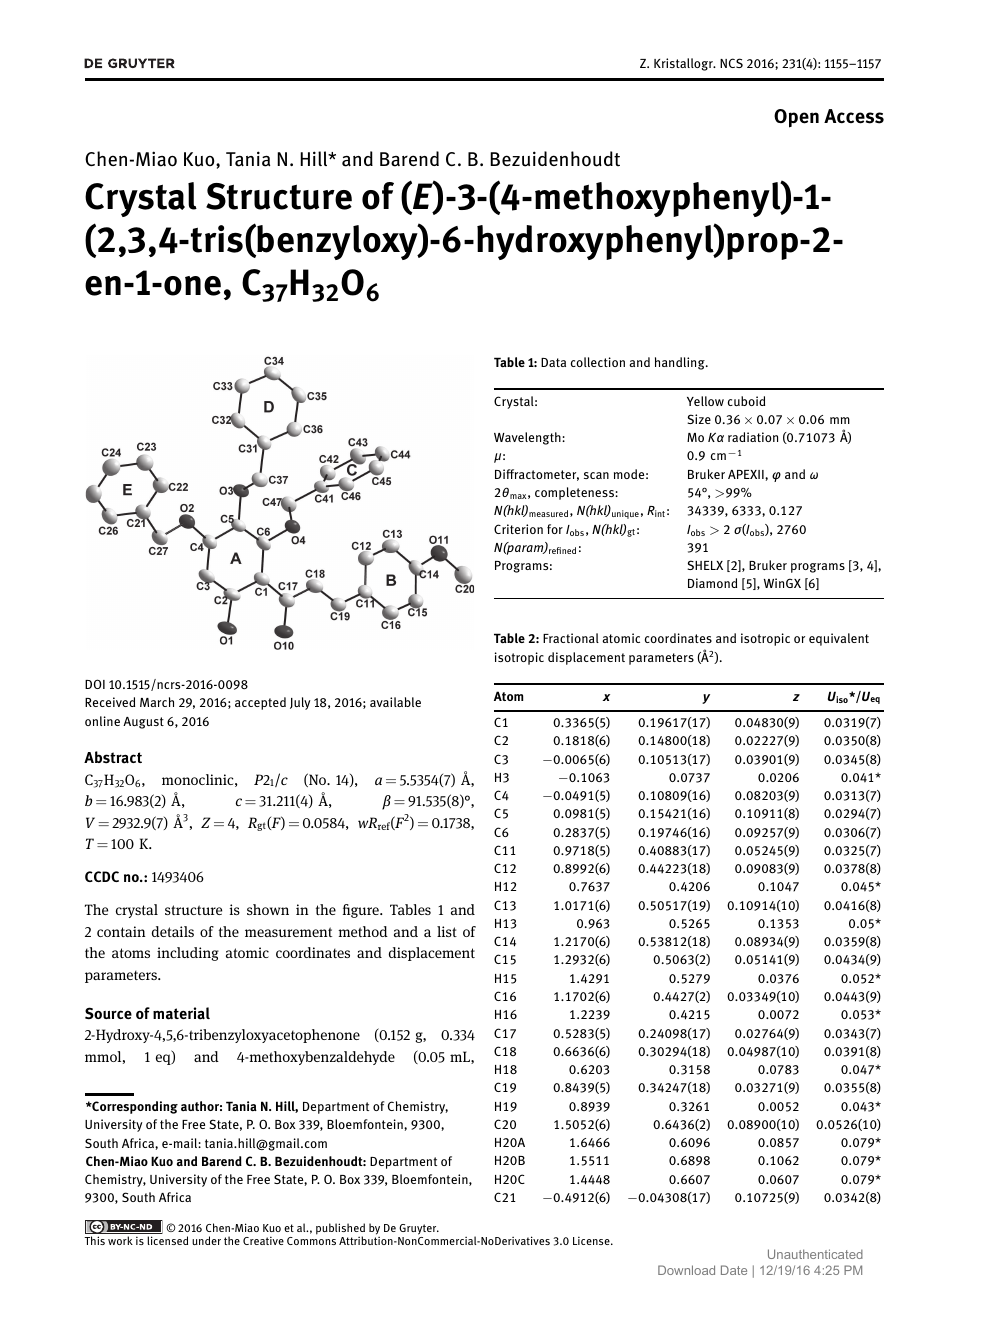 Crystal Structure Of E 3 4 Methoxyphenyl 1 2 3 4 Tris Benzyloxy 6 Hydroxyphenyl Prop 2 En 1 One C37h32o6 Topic Of Research Paper In Biological Sciences Download Scholarly Article Pdf And Read For Free On Cyberleninka Open Science Hub